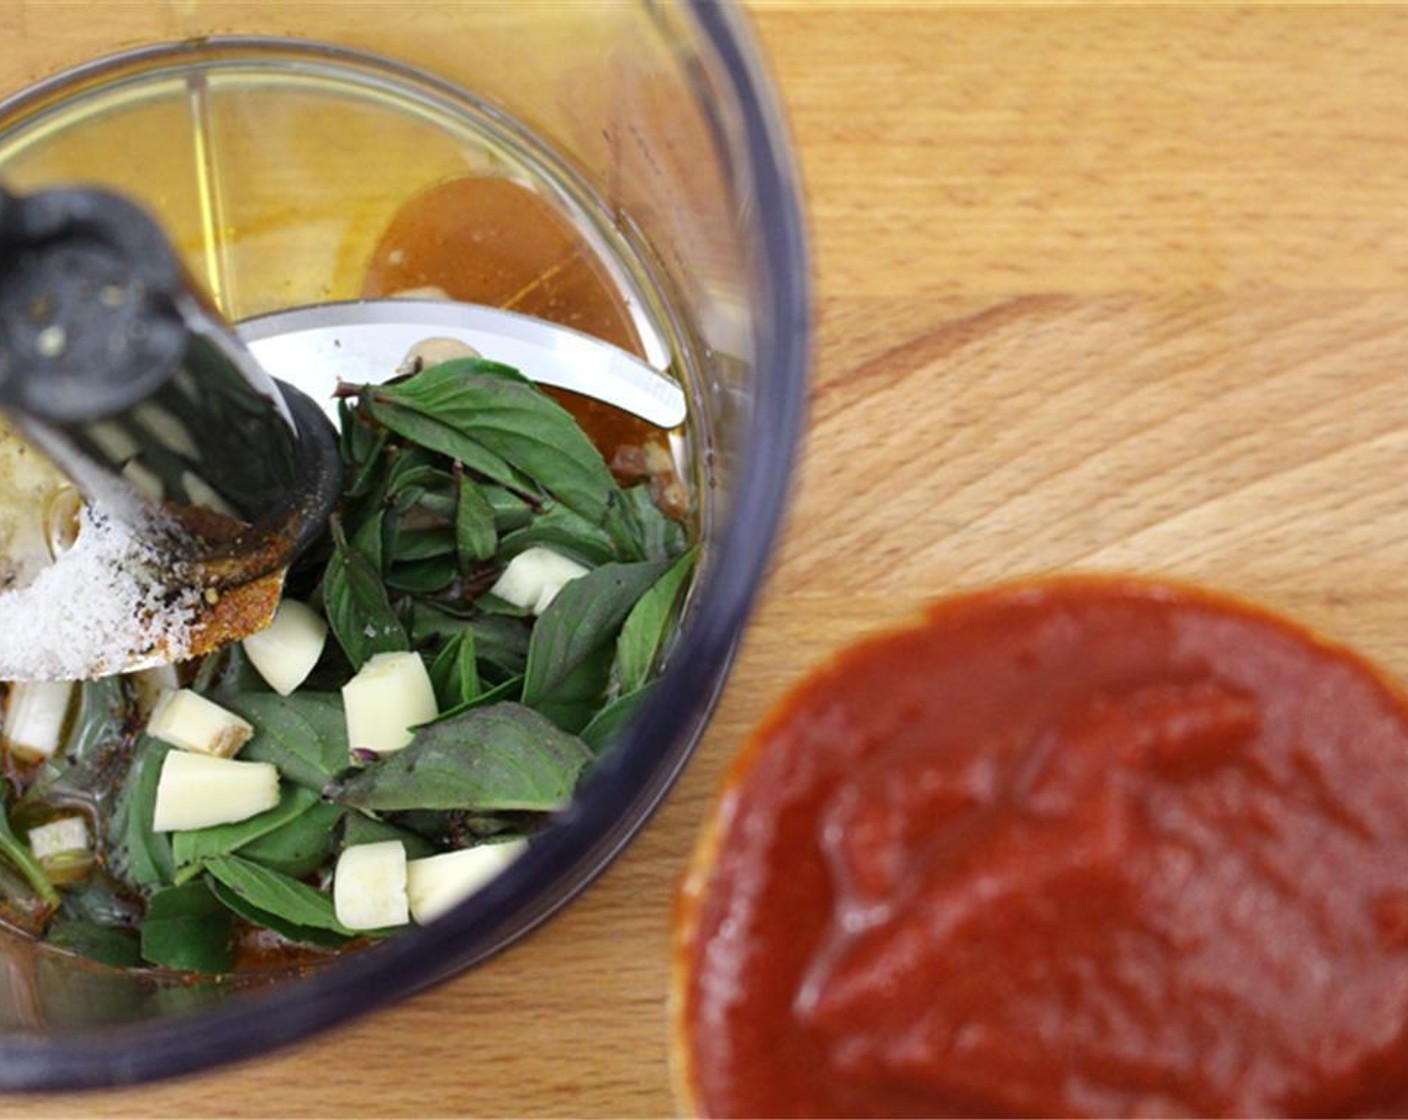 step 3 To make the ketchup, blend {@10:}, Fresh Parsley (1/2 Tbsp), Fresh Basil (1/2 Tbsp), {@12:}, Cayenne Pepper (1 pinch), Fresh Ginger (1 pinch), Maple Syrup (1 tsp), Dijon Mustard (1 tsp), {@11:},Fresh Chives (1 Tbsp), Canned Tomato Purée (1 cup), Distilled White Vinegar (1 Tbsp), {@13:} and Ground Black Pepper (to taste). Blend together. Taste and adjust seasoning if needed.